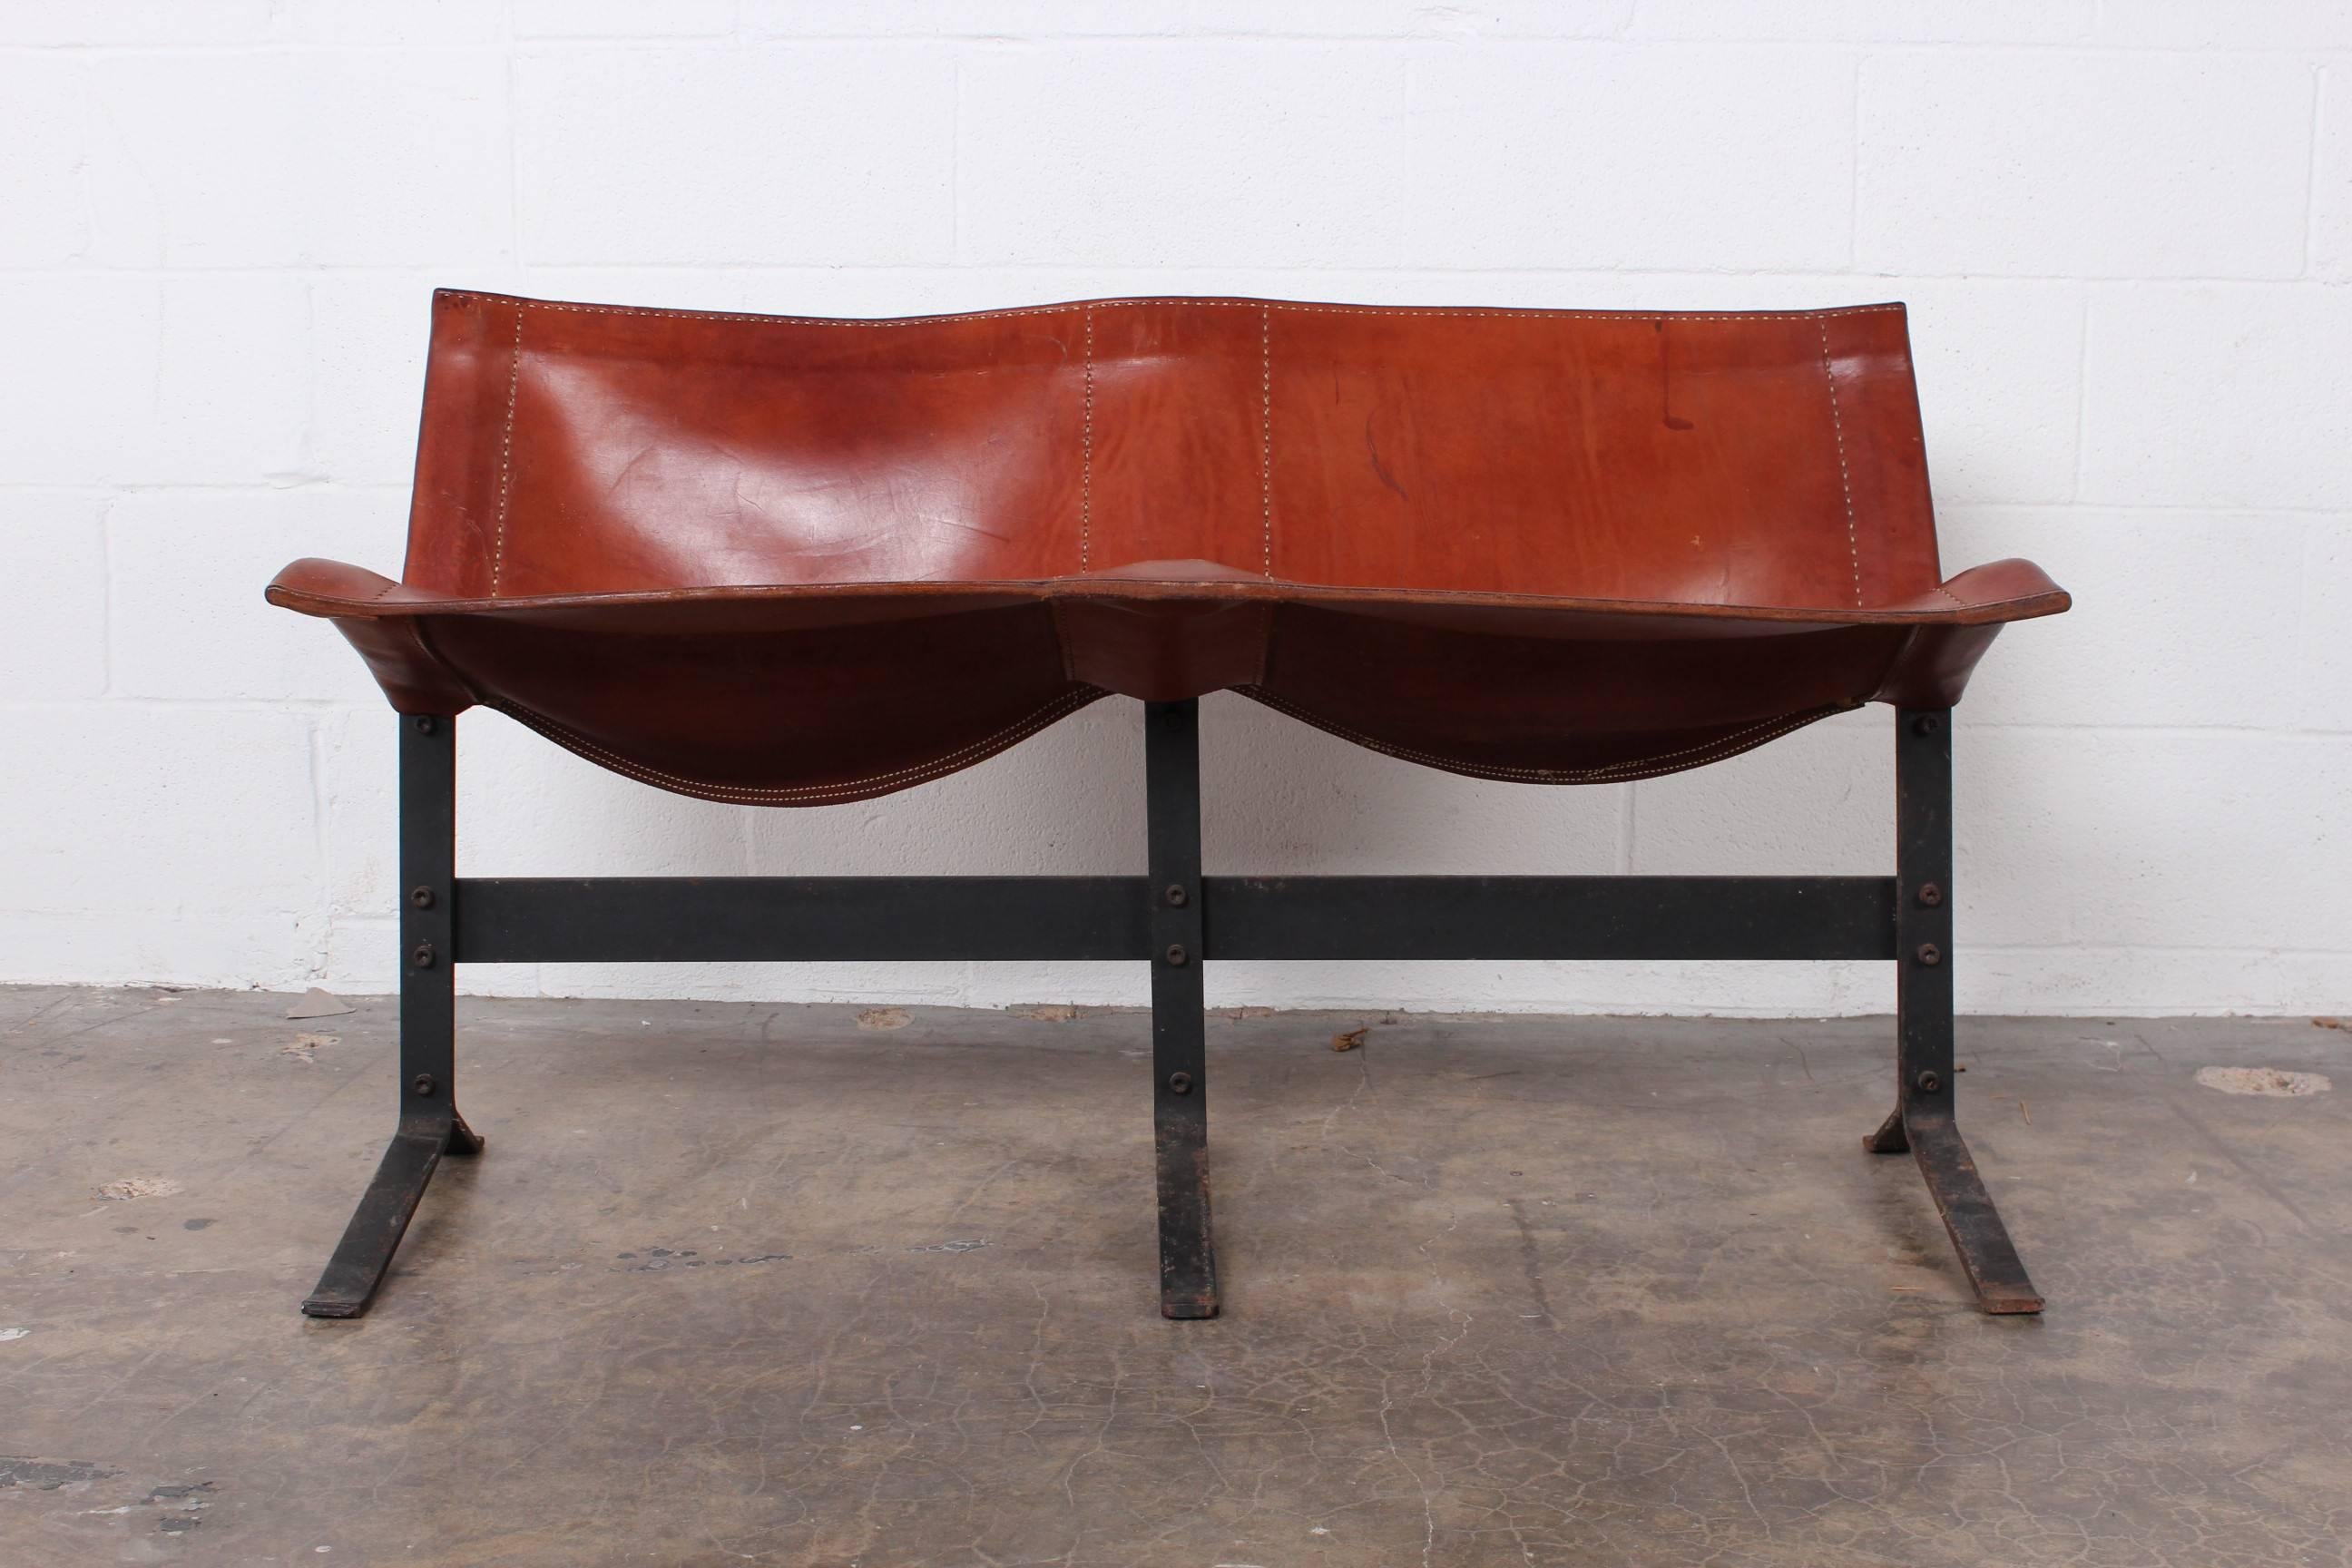 A beautifully patinated leather and iron bench by Max Gottschalk.